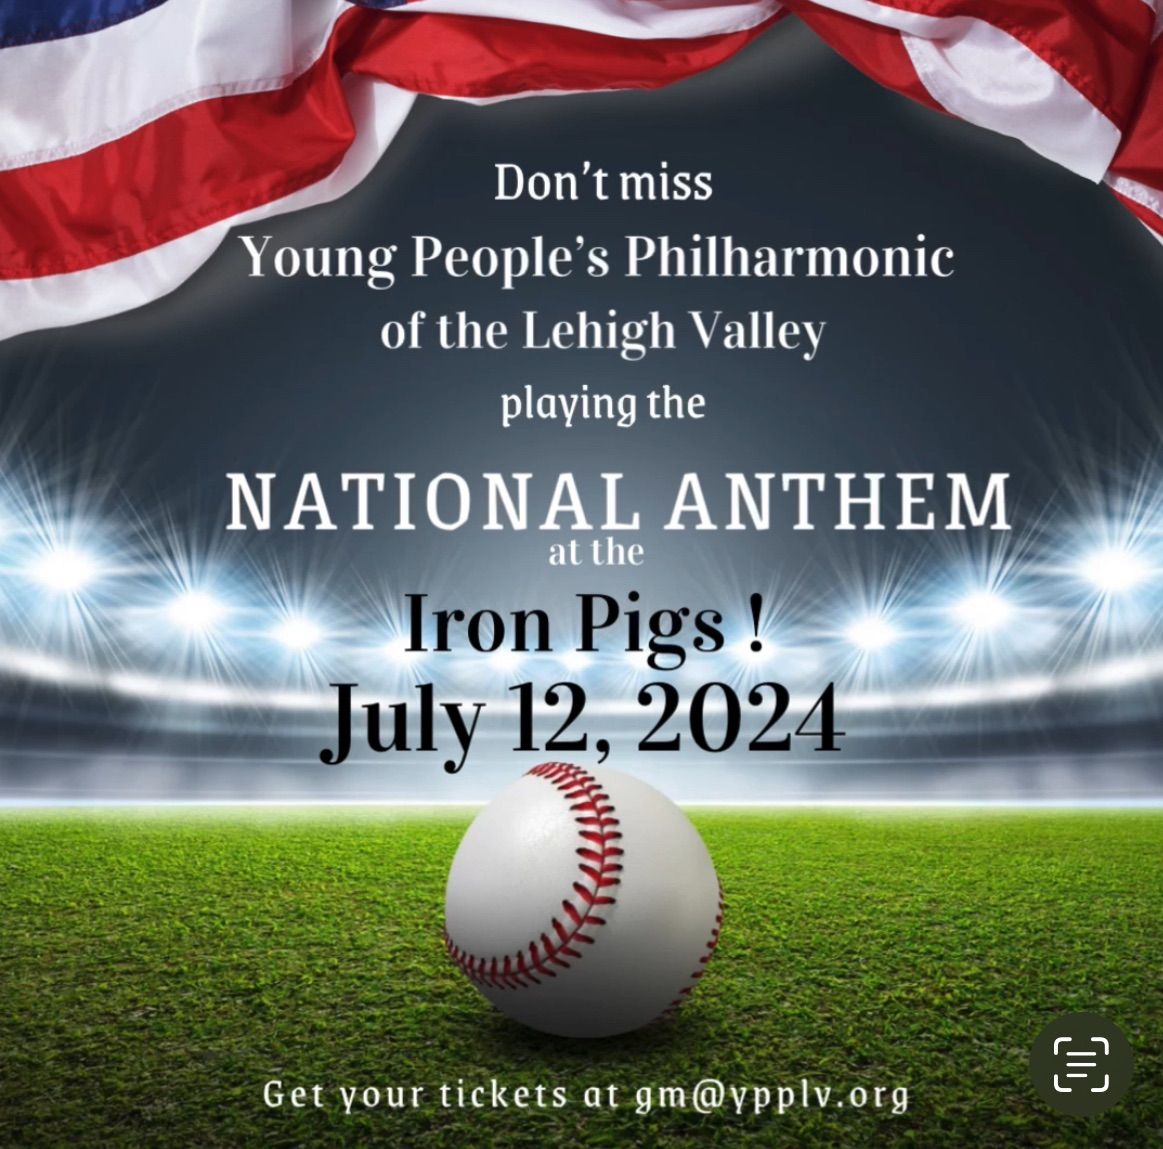 YPPLV playing the National Anthem at the Iron Pigs Game